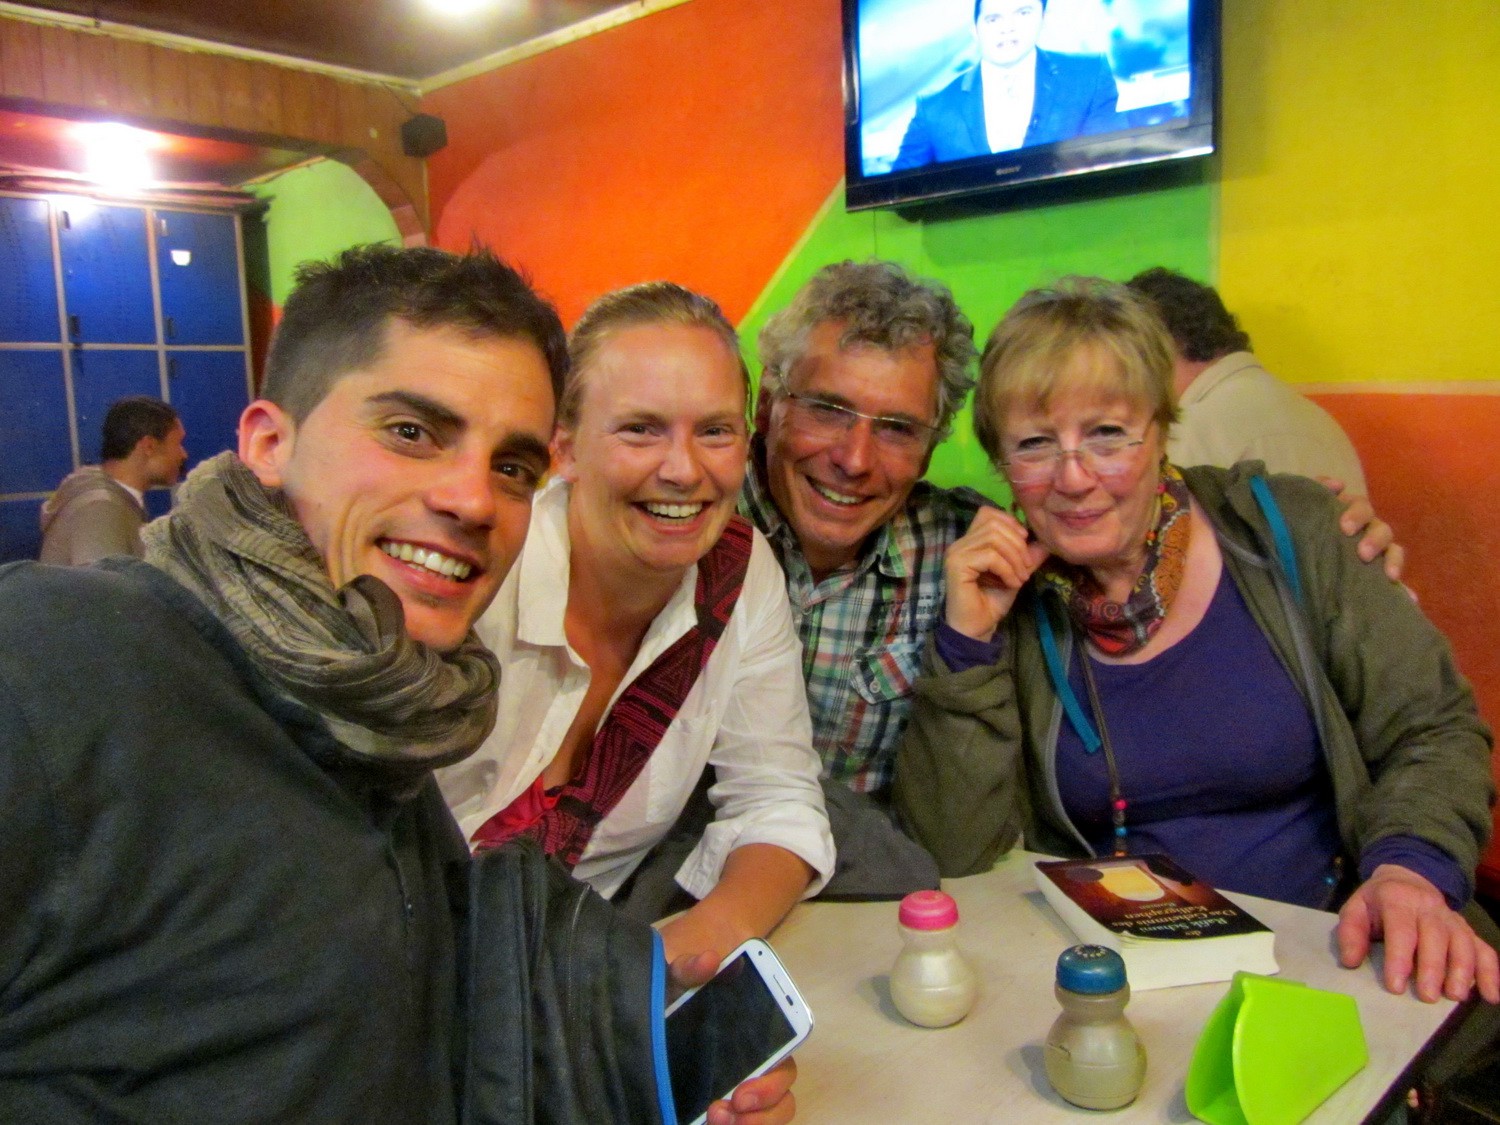 In our favoured Pizzeria close to our Hostal Crancy Croc in Bogota